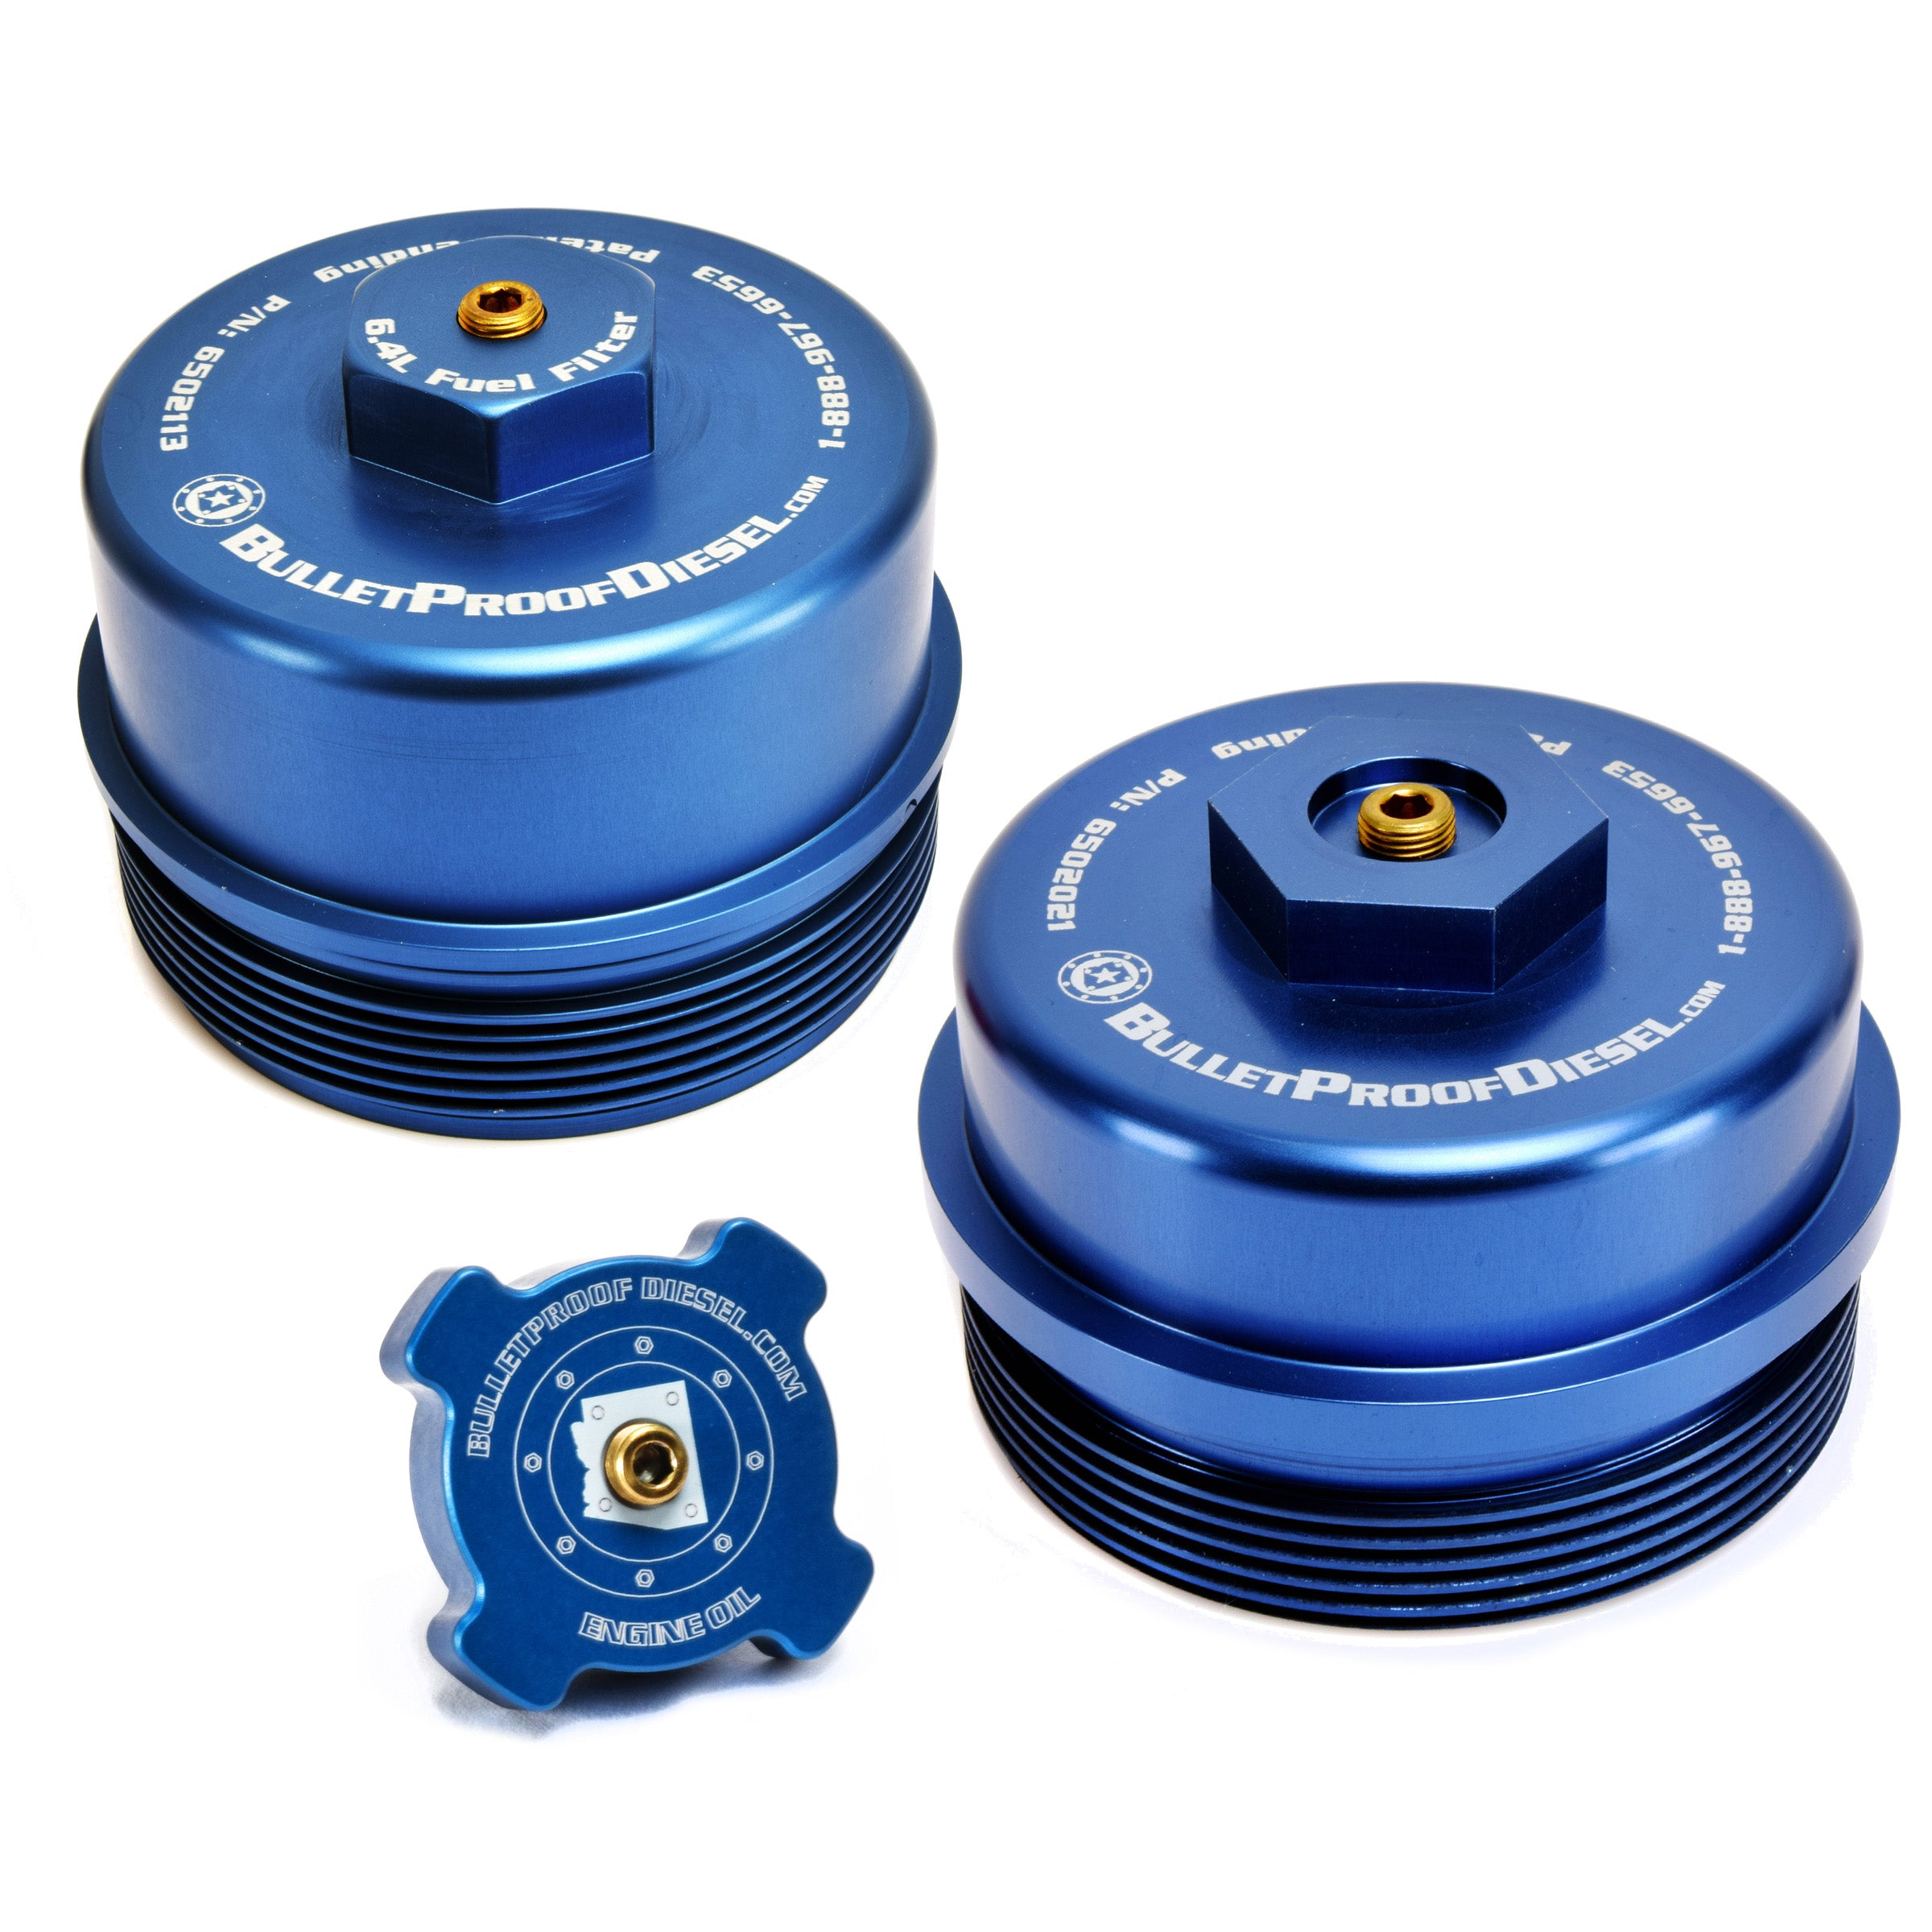 Upgraded Direct Fit Blue Anodized Billet Aluminum Oil Filter, Oil Fill, and Lower Fuel Rail Cap Set for the Ford Power Stroke 6.4L Diesel with 1/8” MPT Threaded Port. Fits Years 2008 2009 2010.